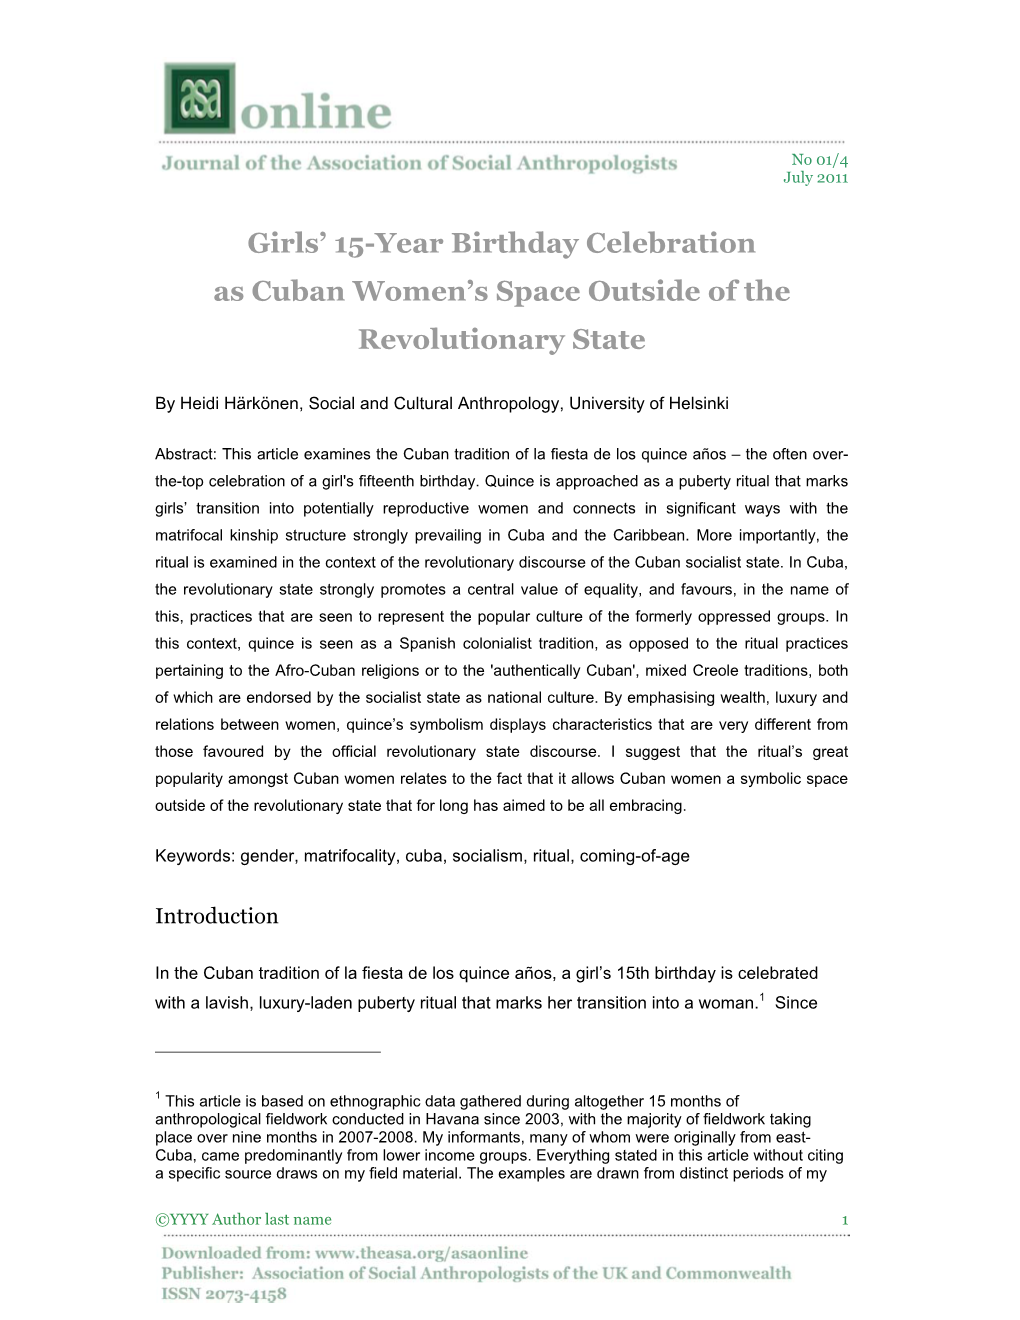 Girls' 15-Year Birthday Celebration As Cuban Women's Space Outside of the Revolutionary State